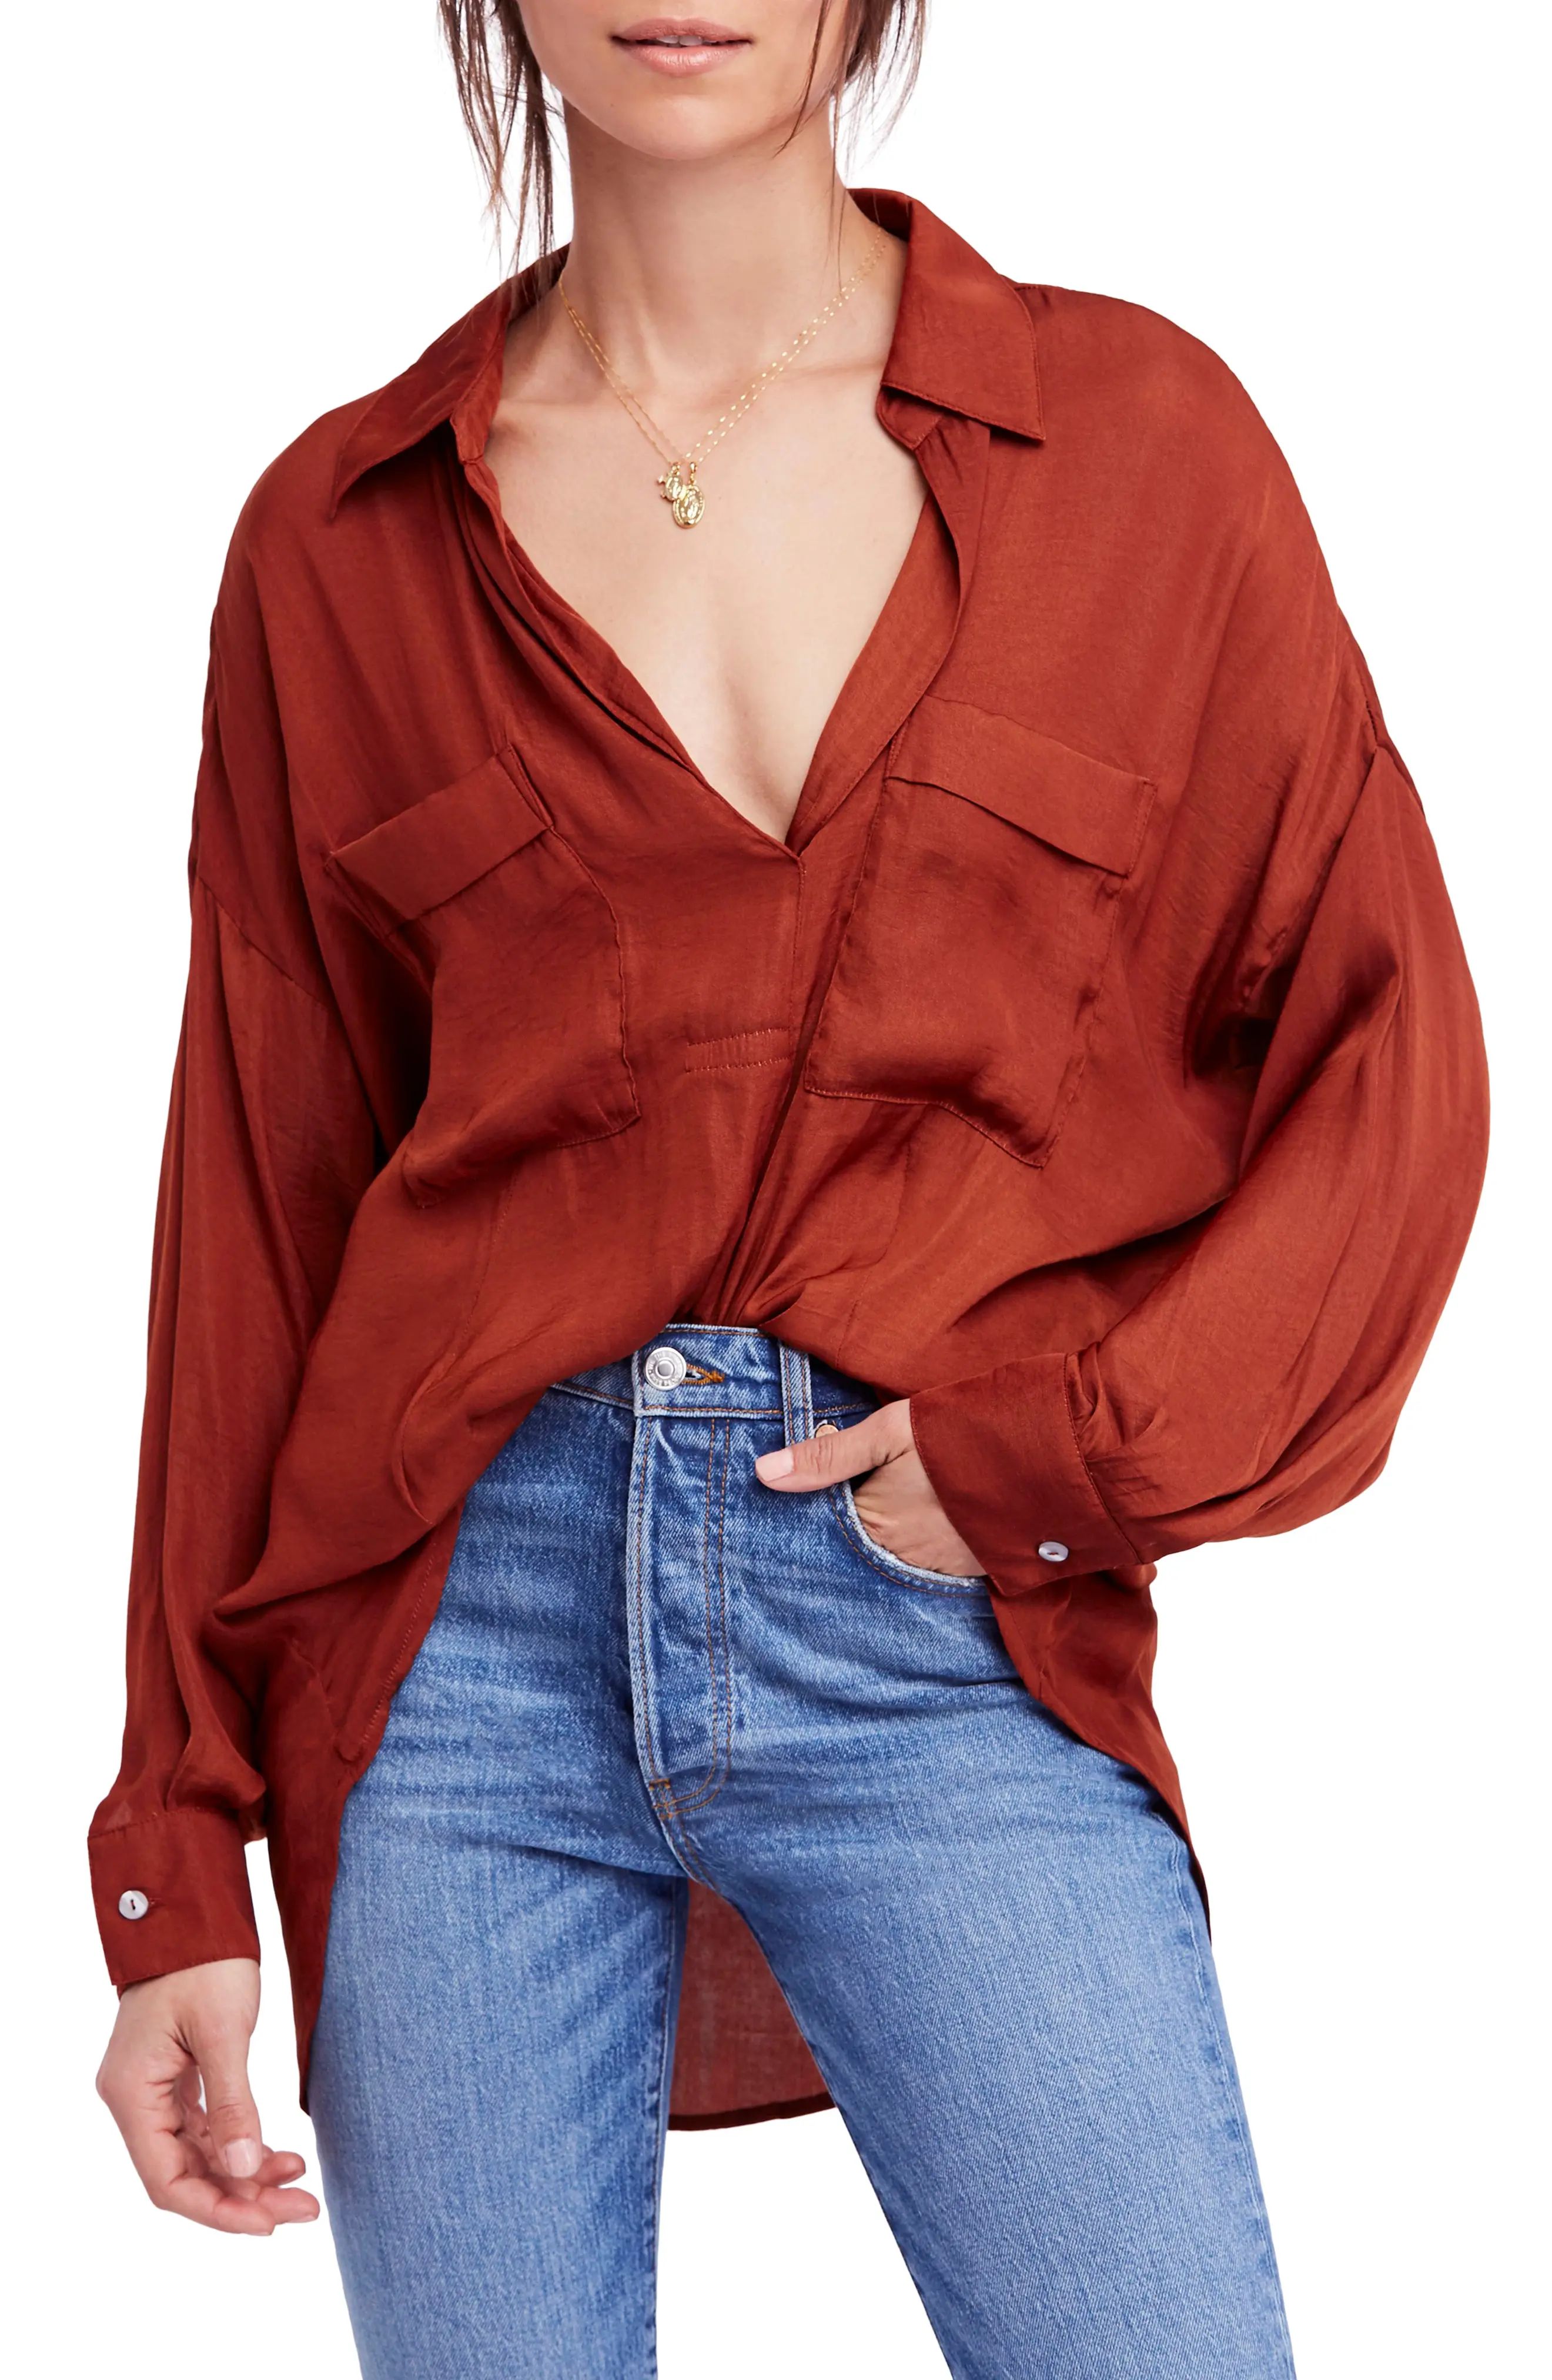 Women's Free People Starry Dreams Shirt, Size X-Small - Red | Nordstrom